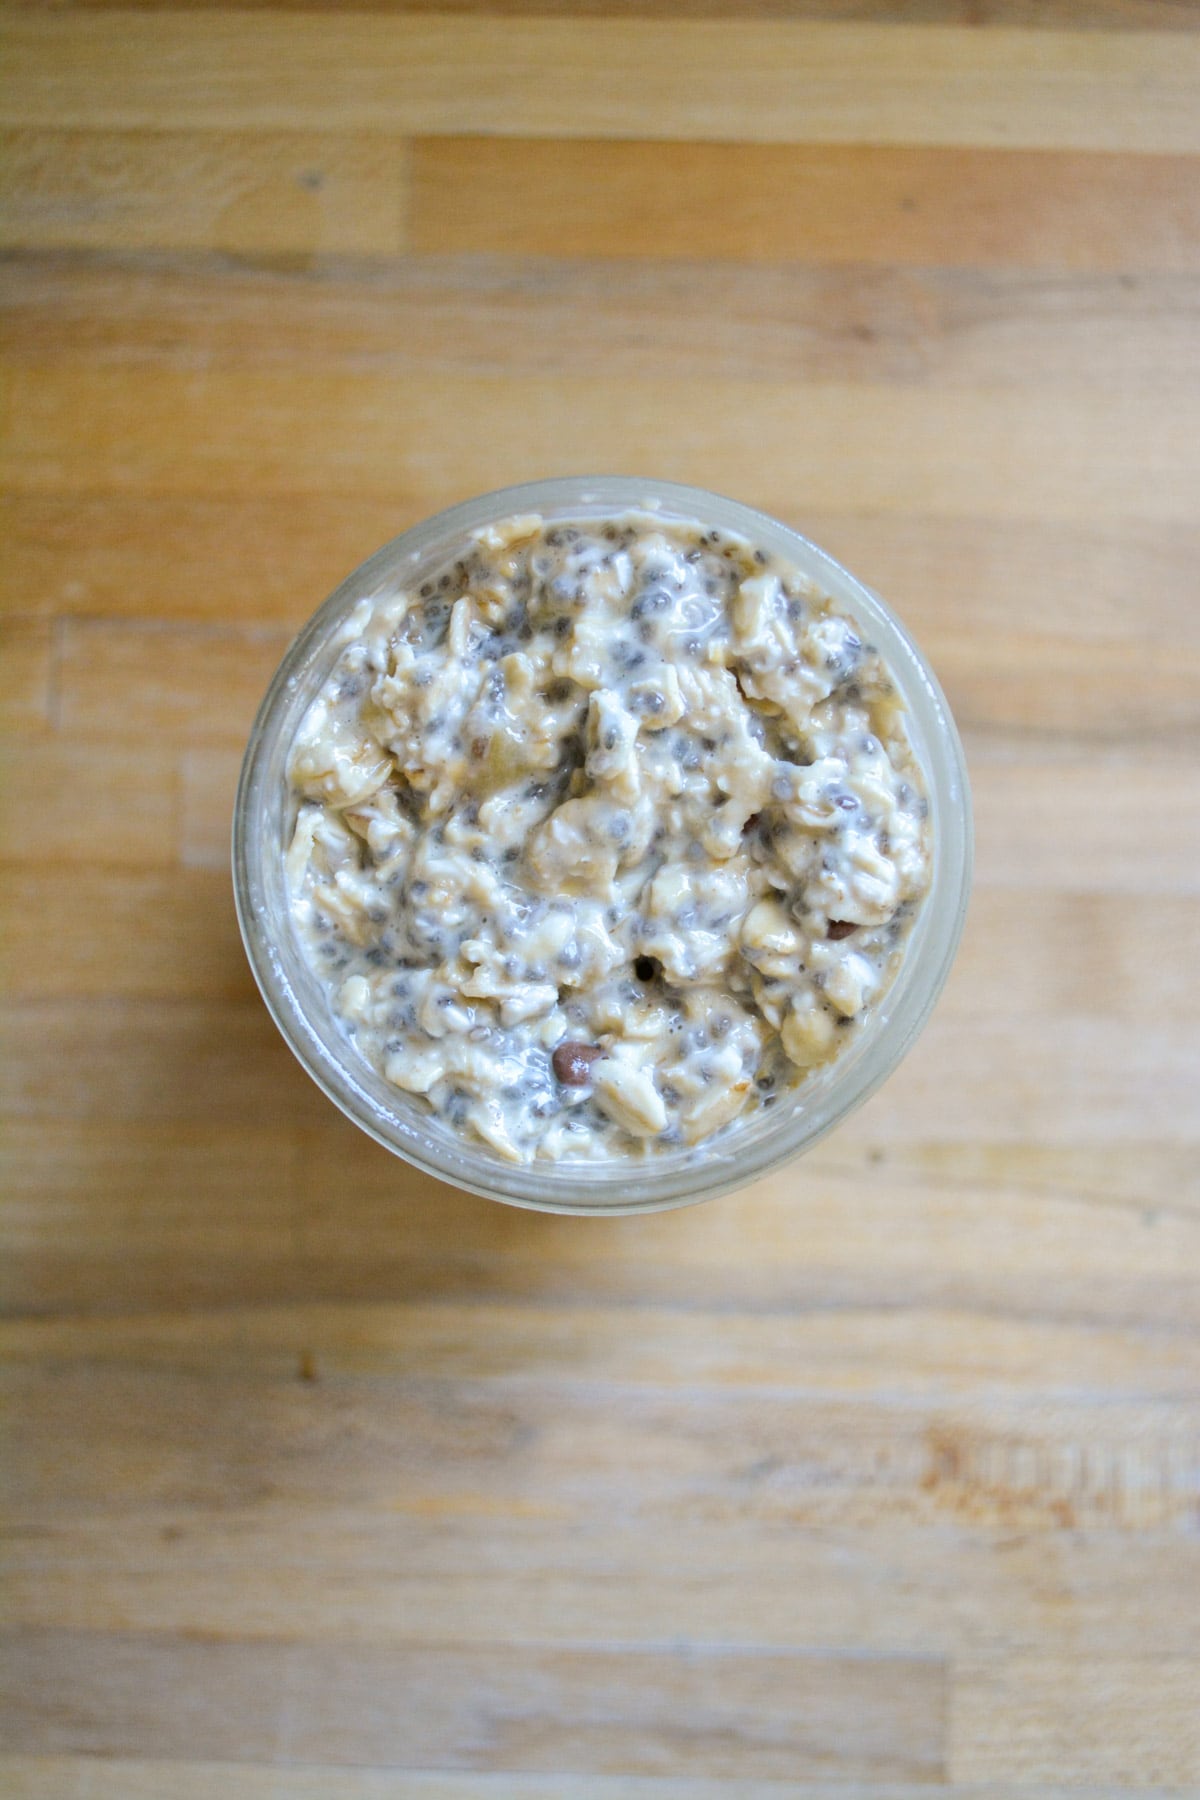 Overnight oats in a jar ready to be served.